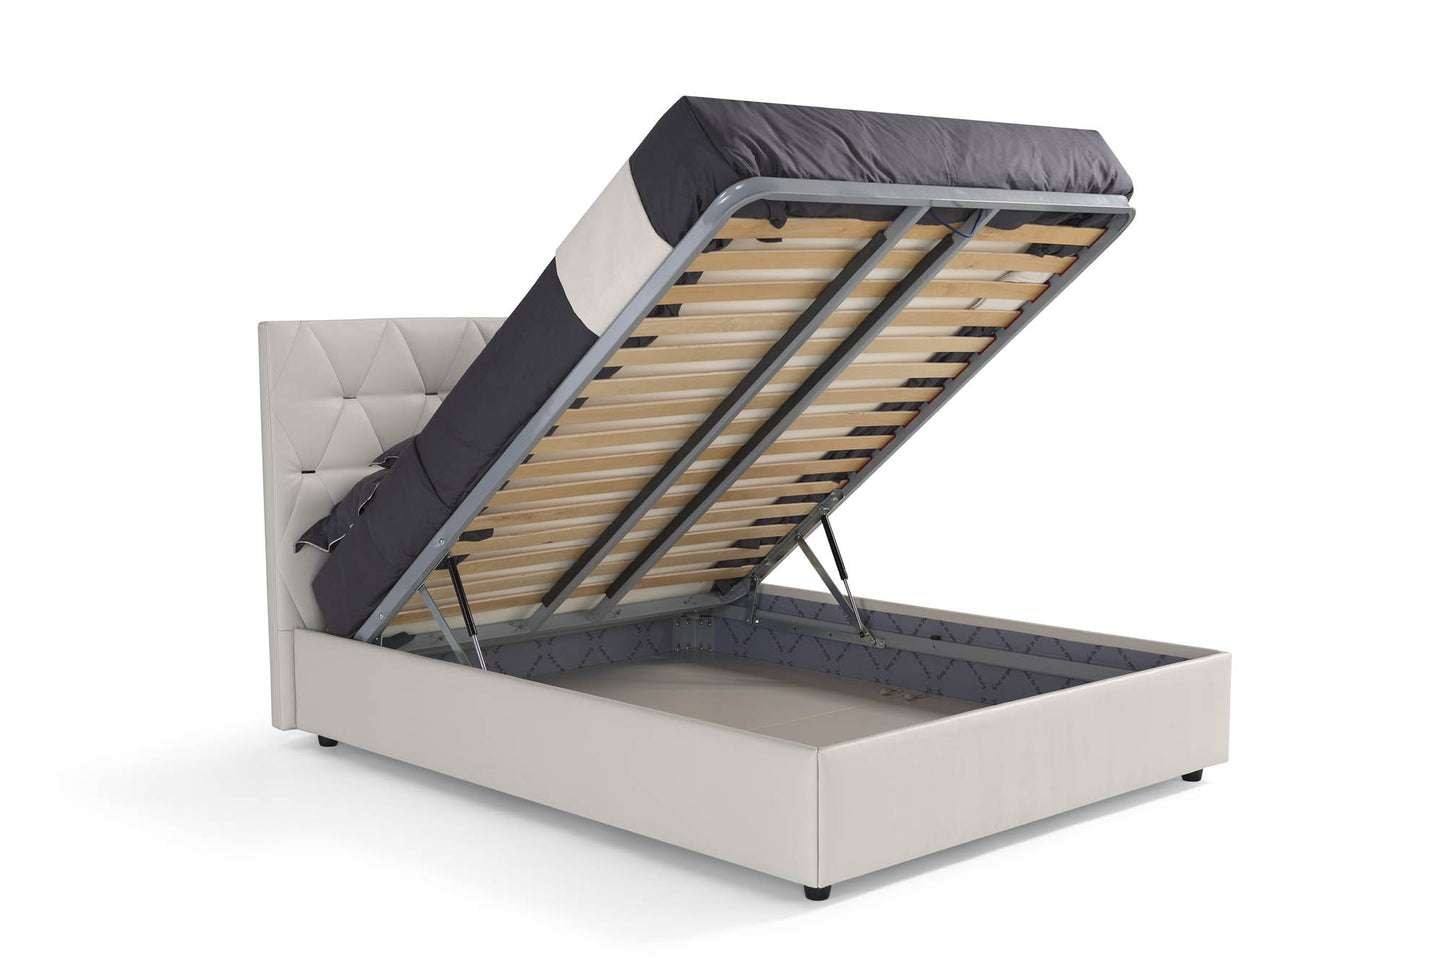 Novaluna - Lux Bed - Made in Italy - Eurohaus Modern Furniture LLC